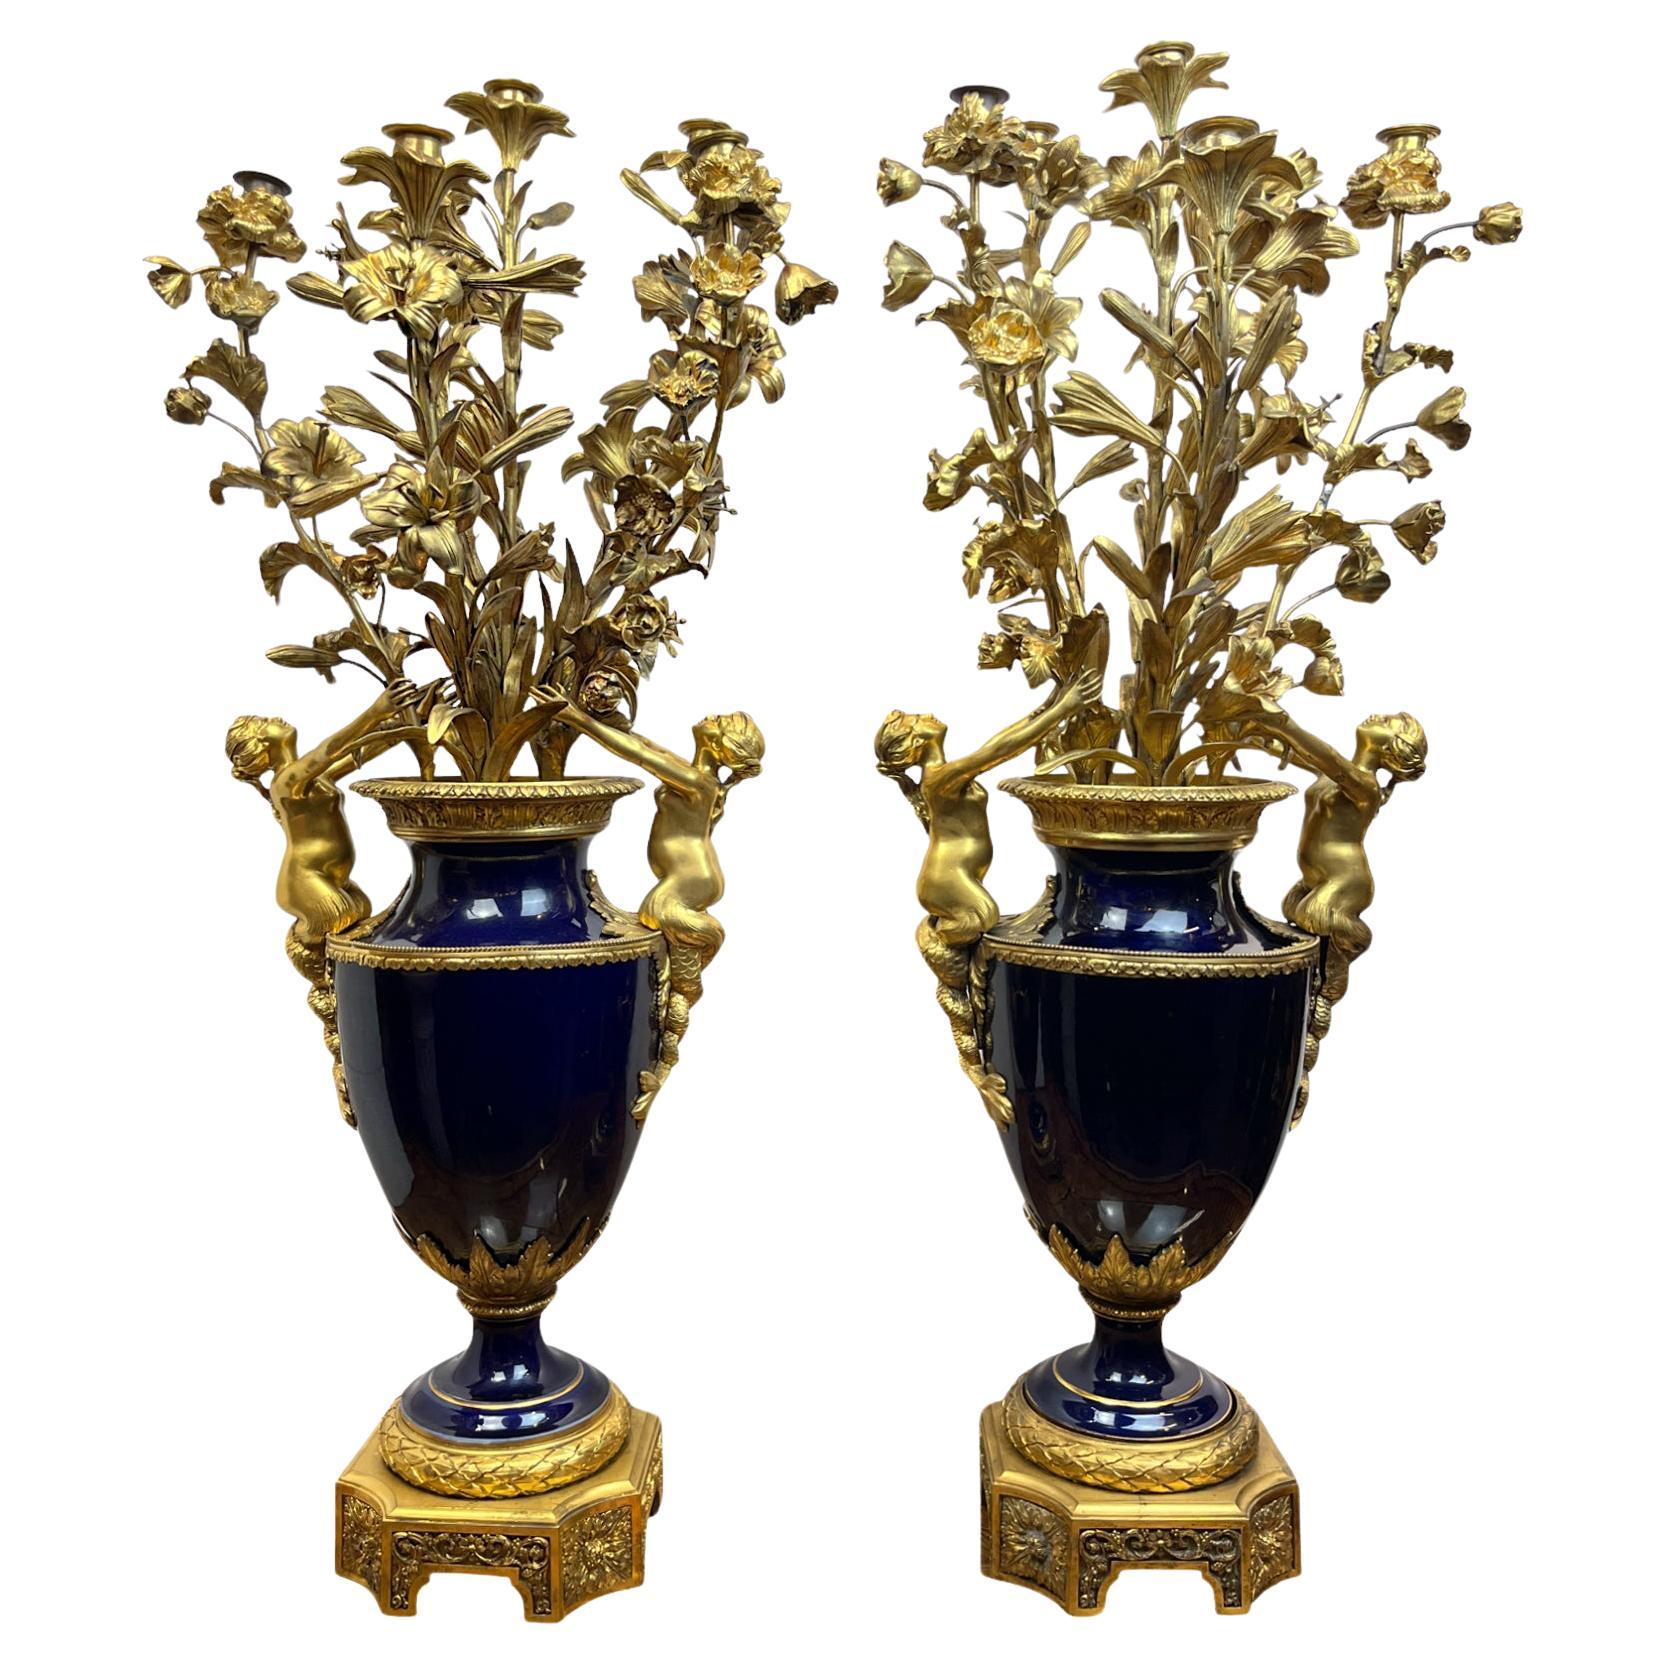 Pair Of Ormolu Mounted Sèvres-style Bouquet Candelabras For Sale